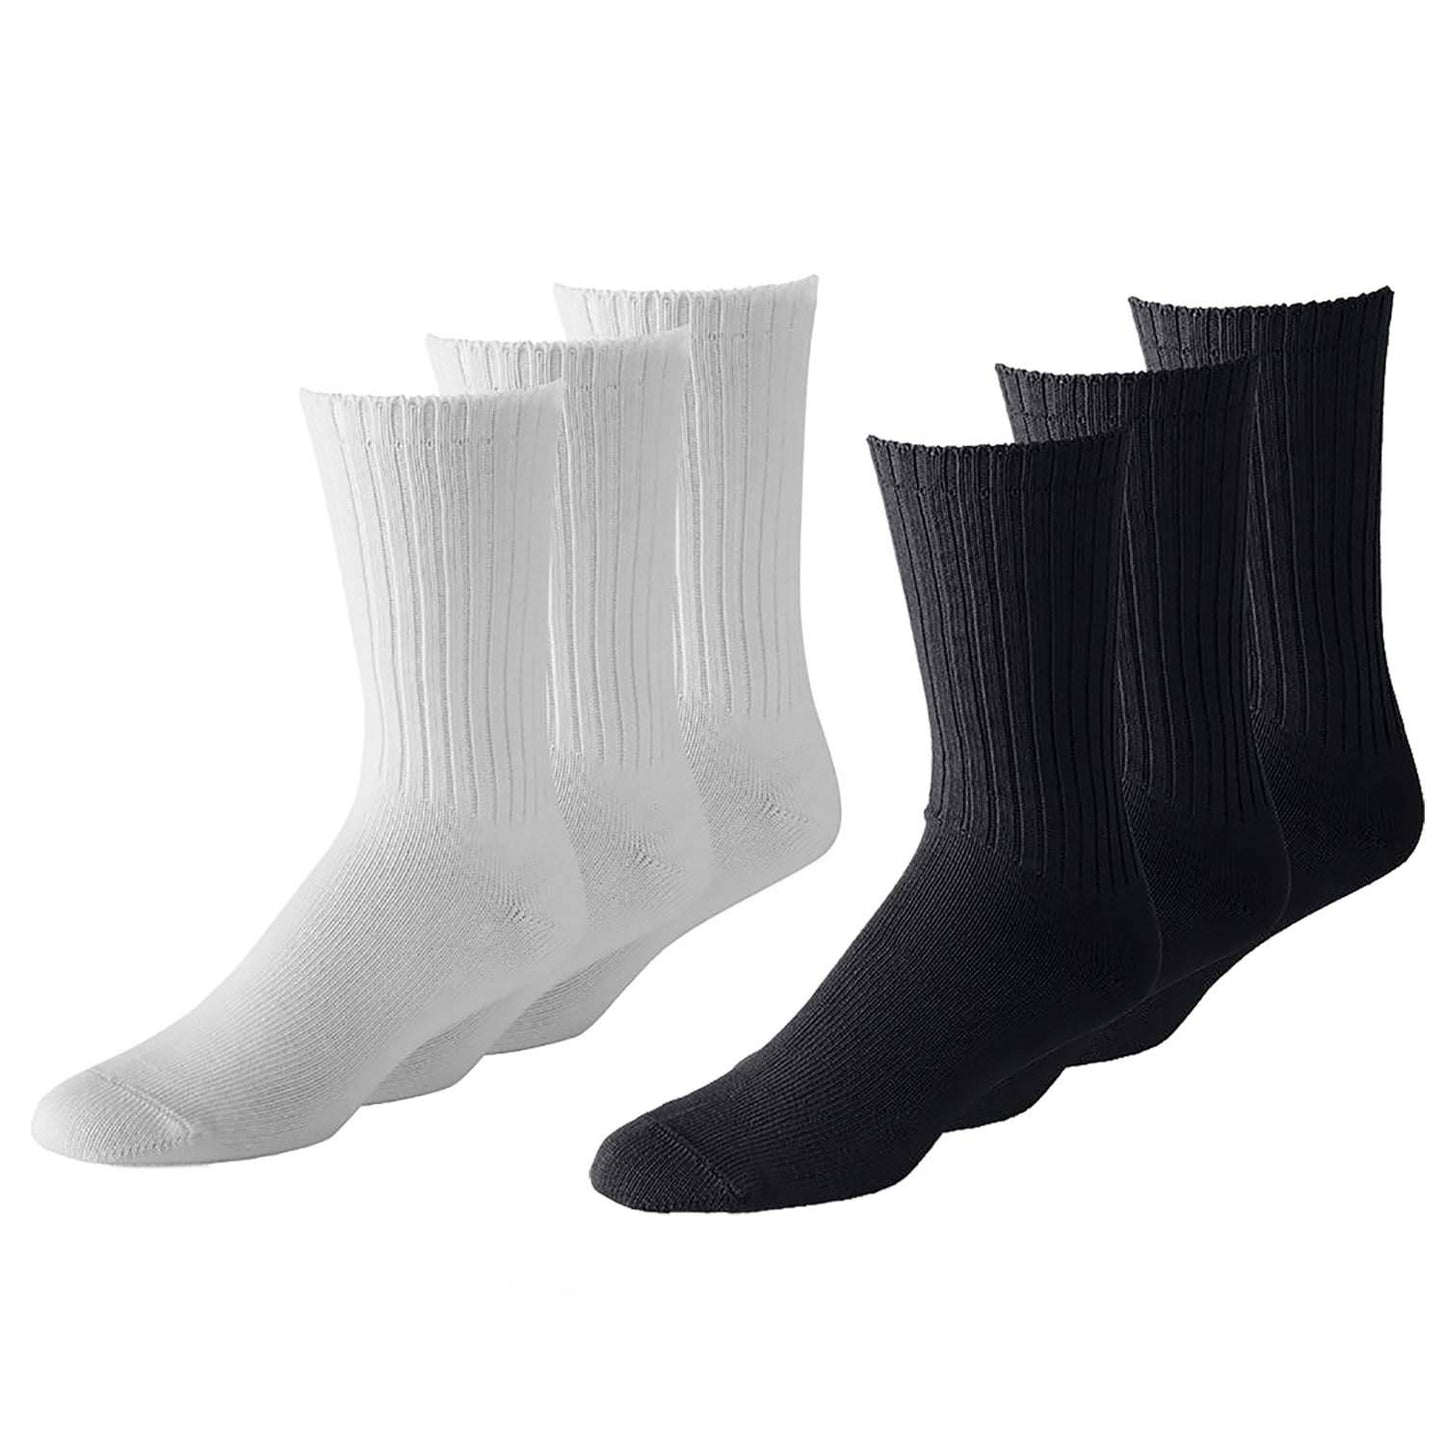 Mechaly Unisex Indoor and Outdoor Crew and Low Cut Cotton Socks - 12 Pack